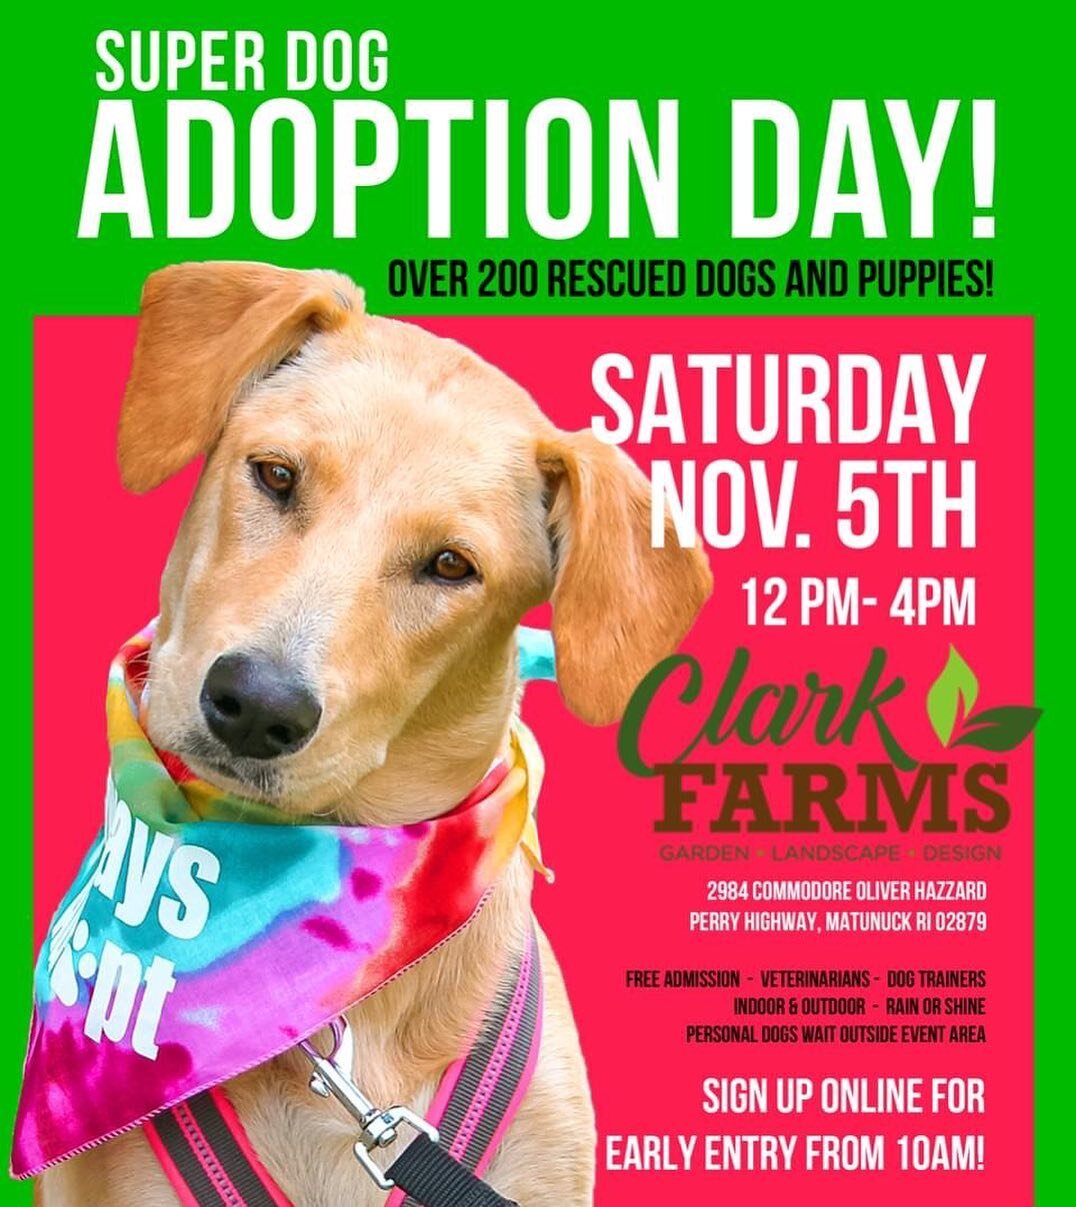 November can't get here soon enough! We're whipping up another Super Dog Adoption Day! 

Join us on Saturday, November 5th from 12pm-4pm at Clark Farms! 200+ dogs and puppies will be waiting for YOU! 

Stay tuned in the coming months for more informa